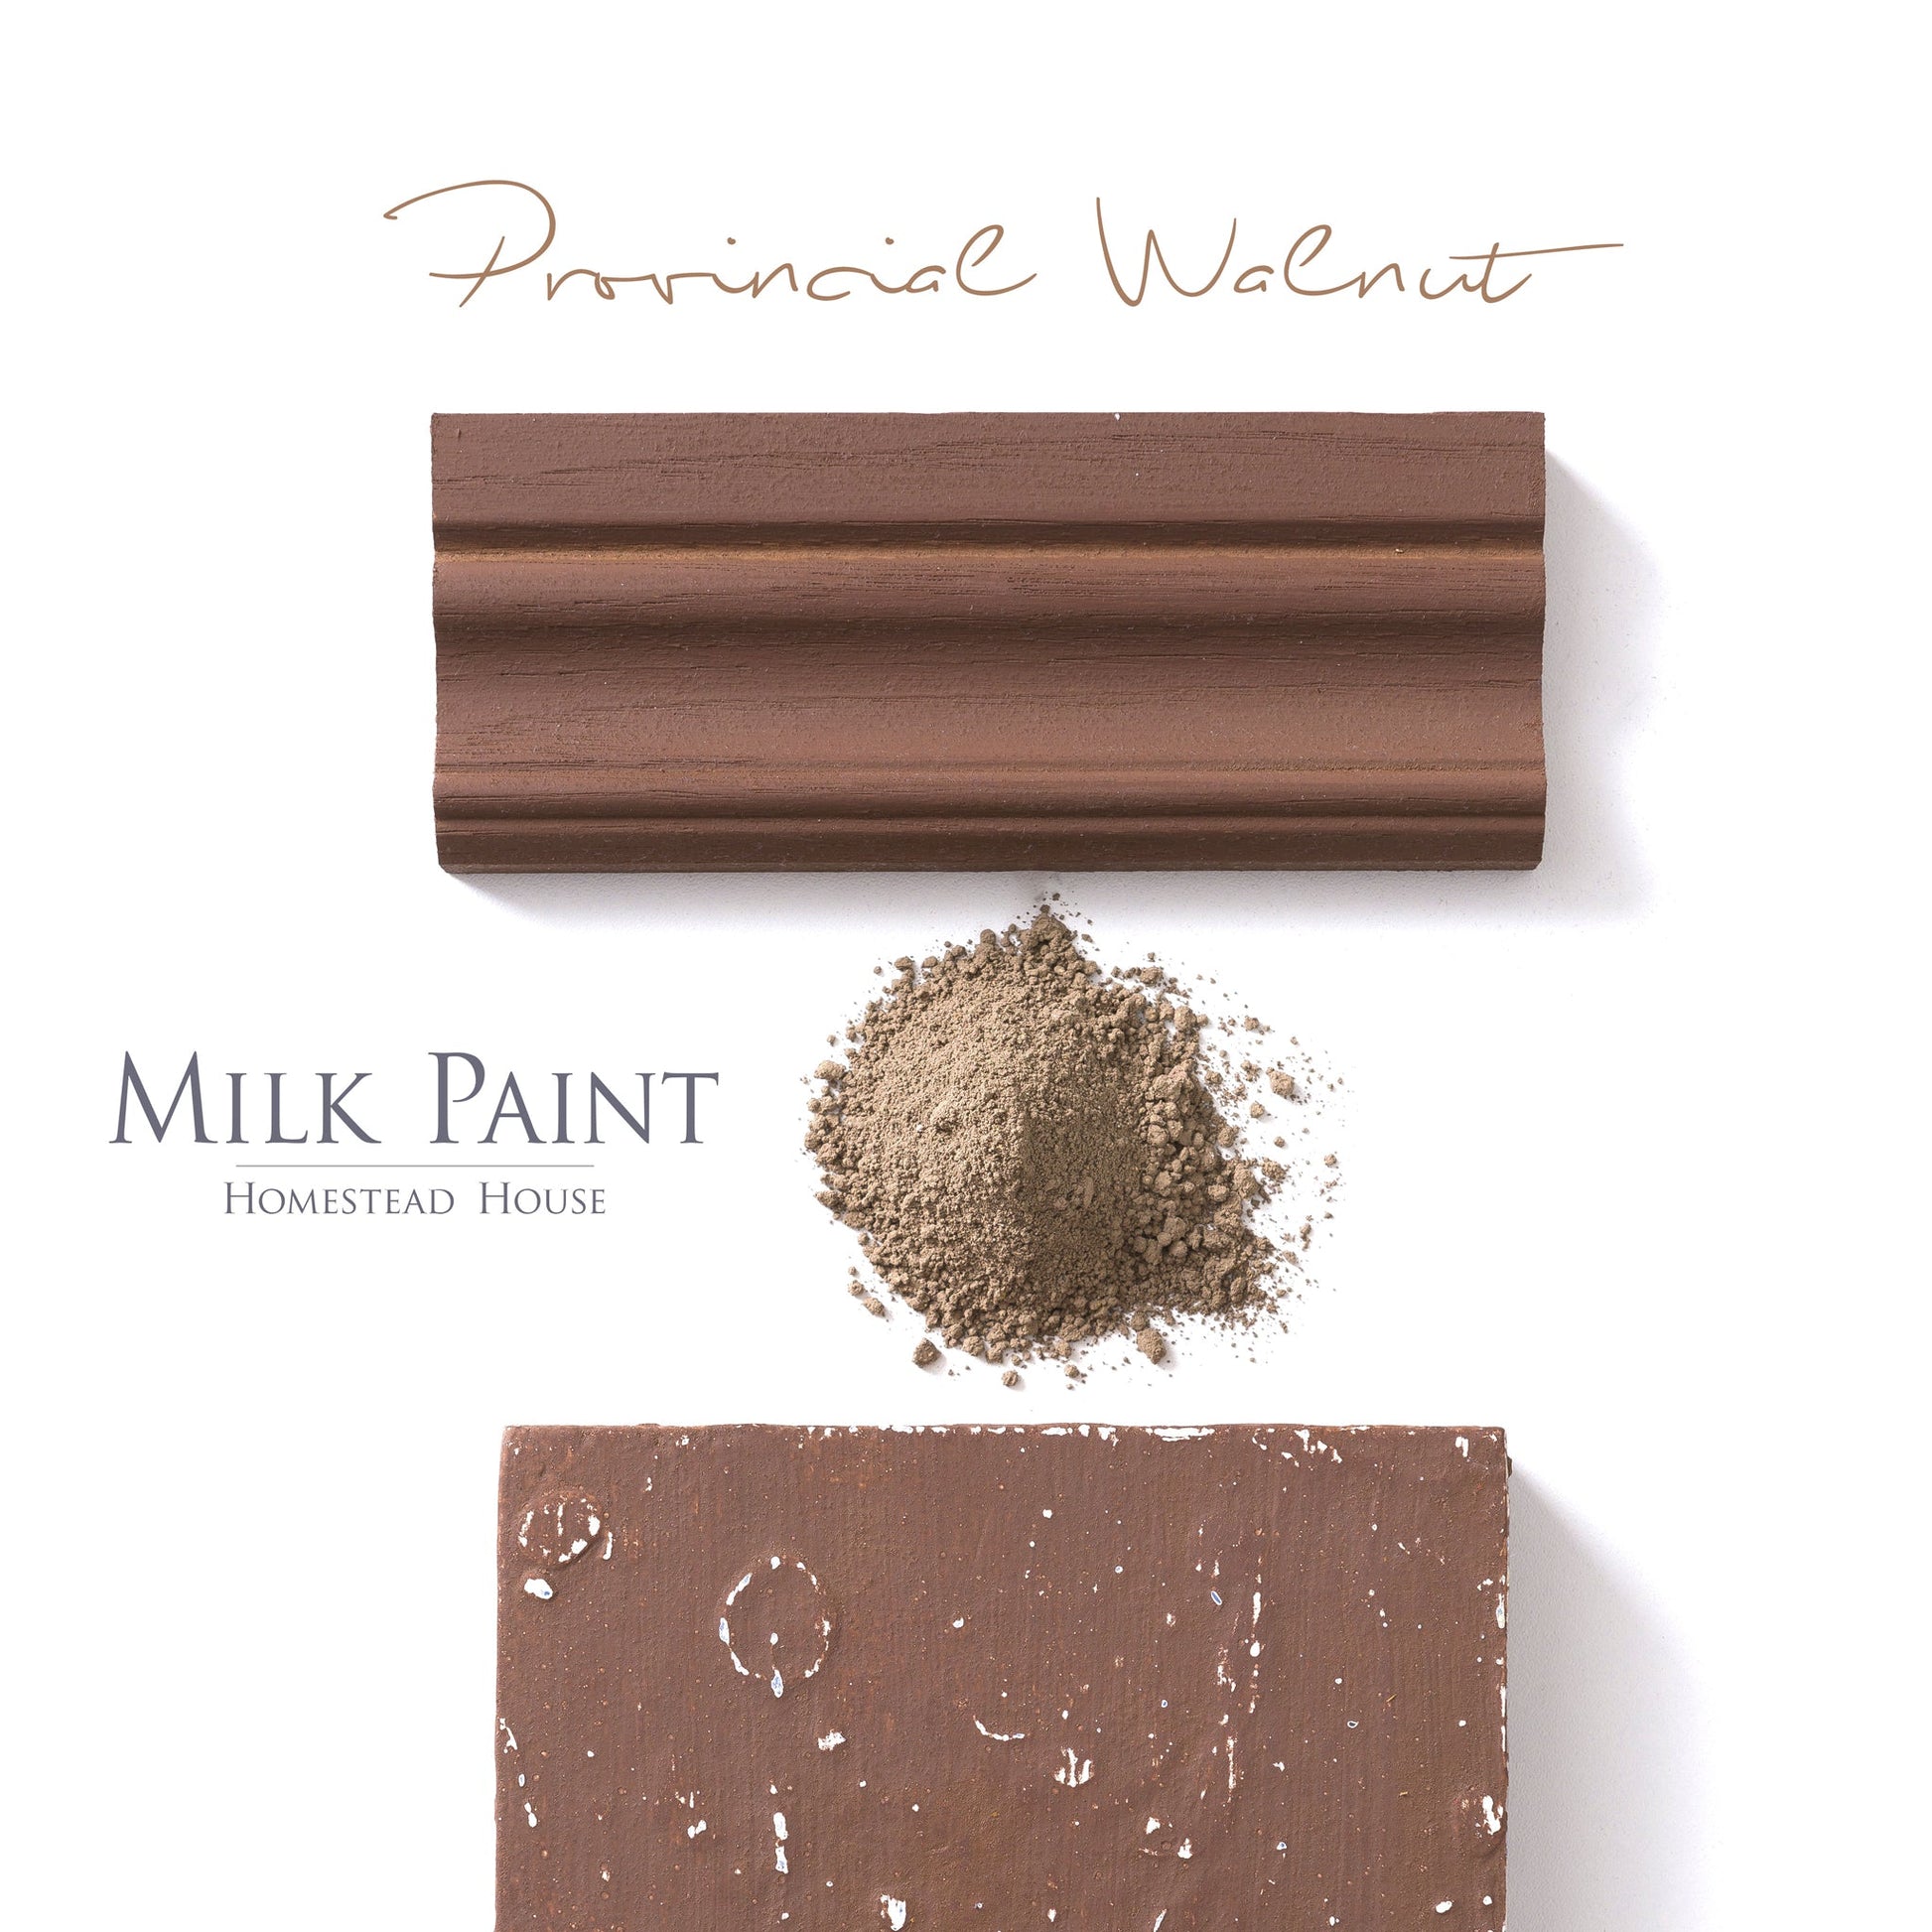 Milk Paint Stain by Homestead House in Provincial Walnut.  |  homesteadhouse.ca